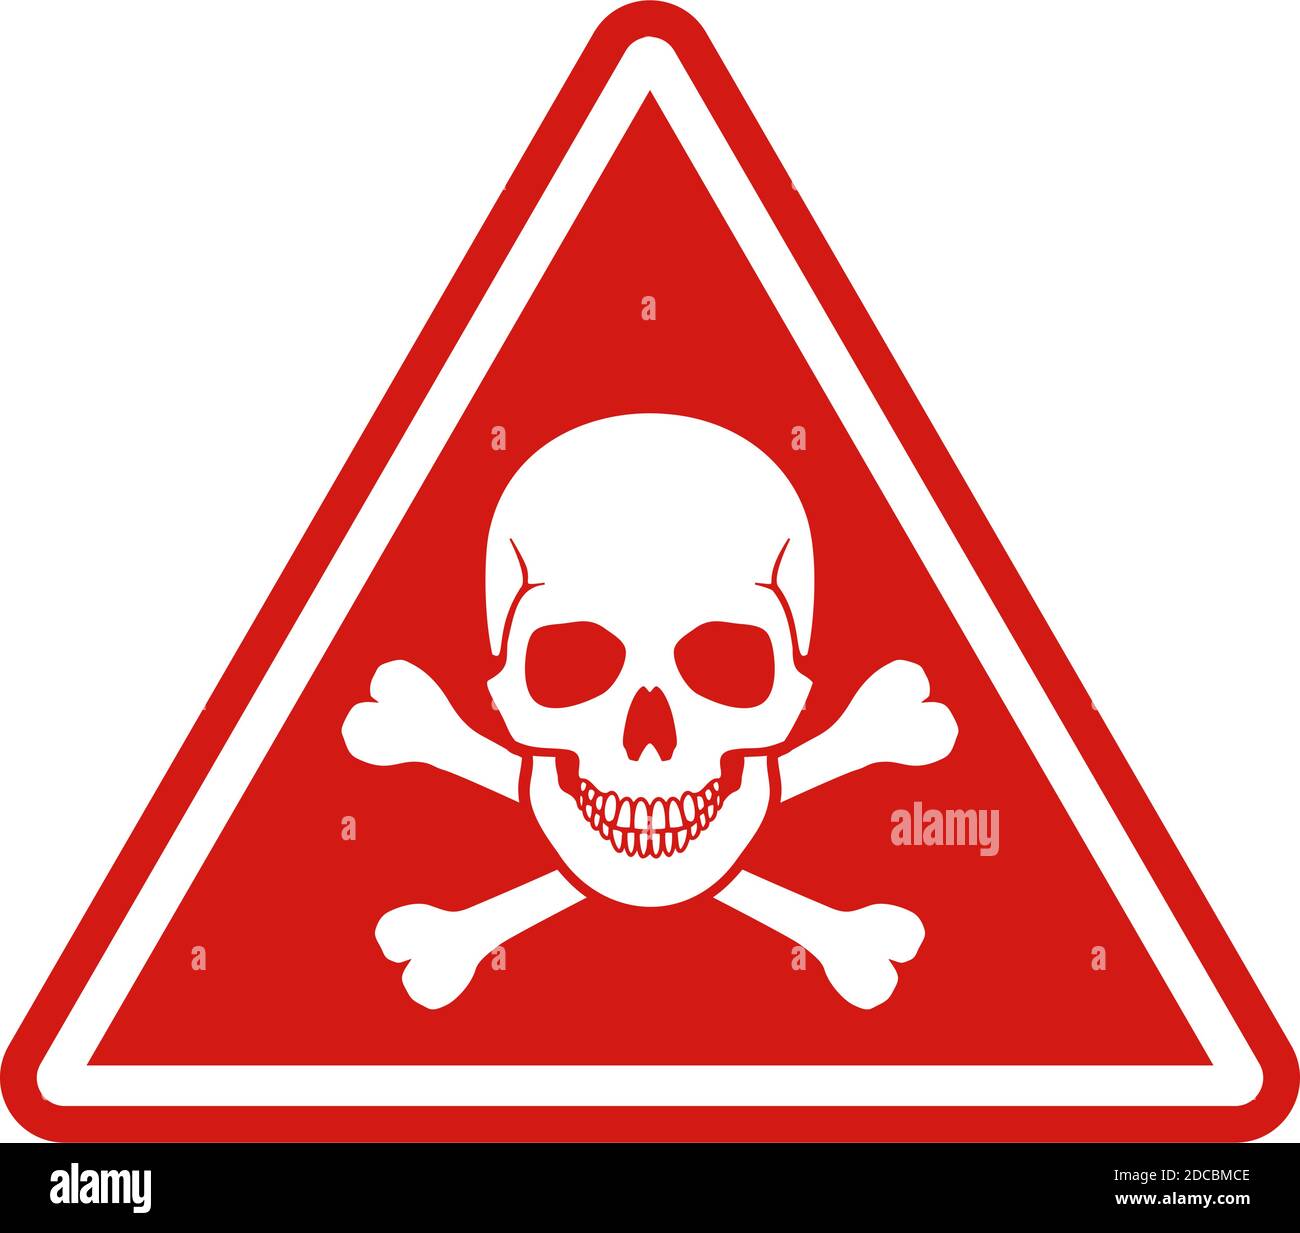 Red warning or danger road sign with skull and crossbones with white frame vector illustration Stock Vector